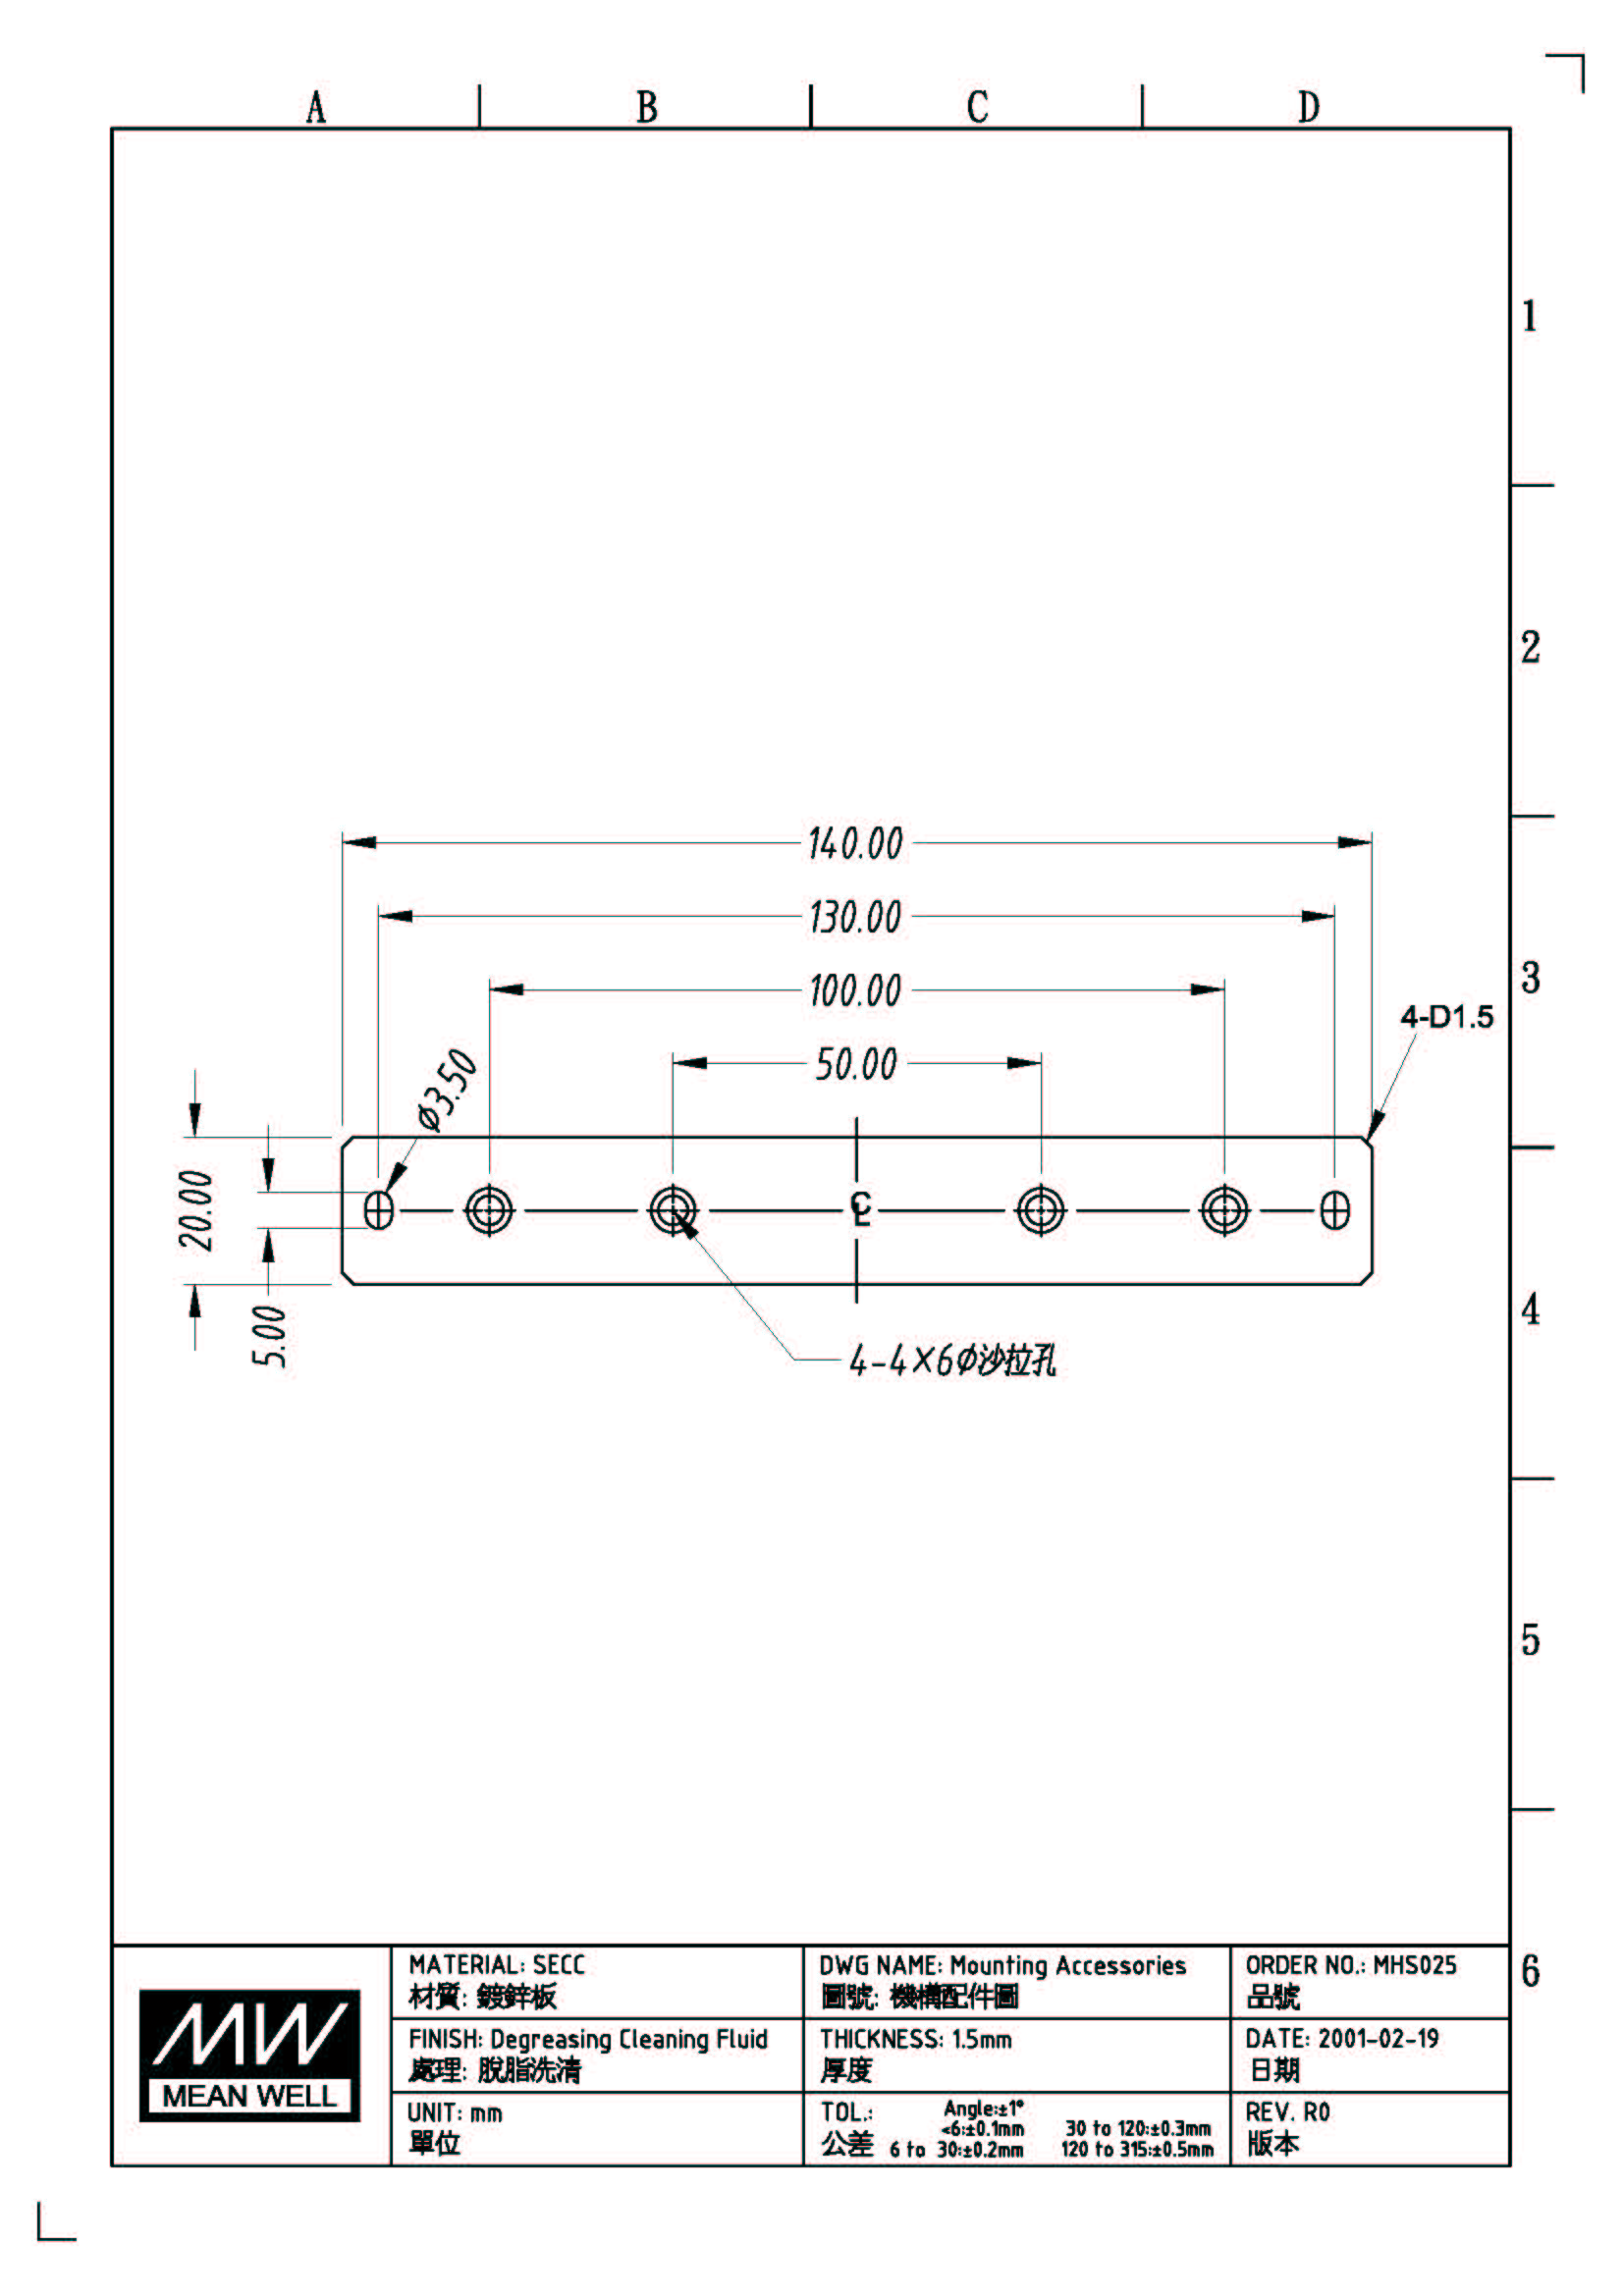 Mean Well Mounting Accessories MHS025 - Accessory Mounting Diagram Graphic